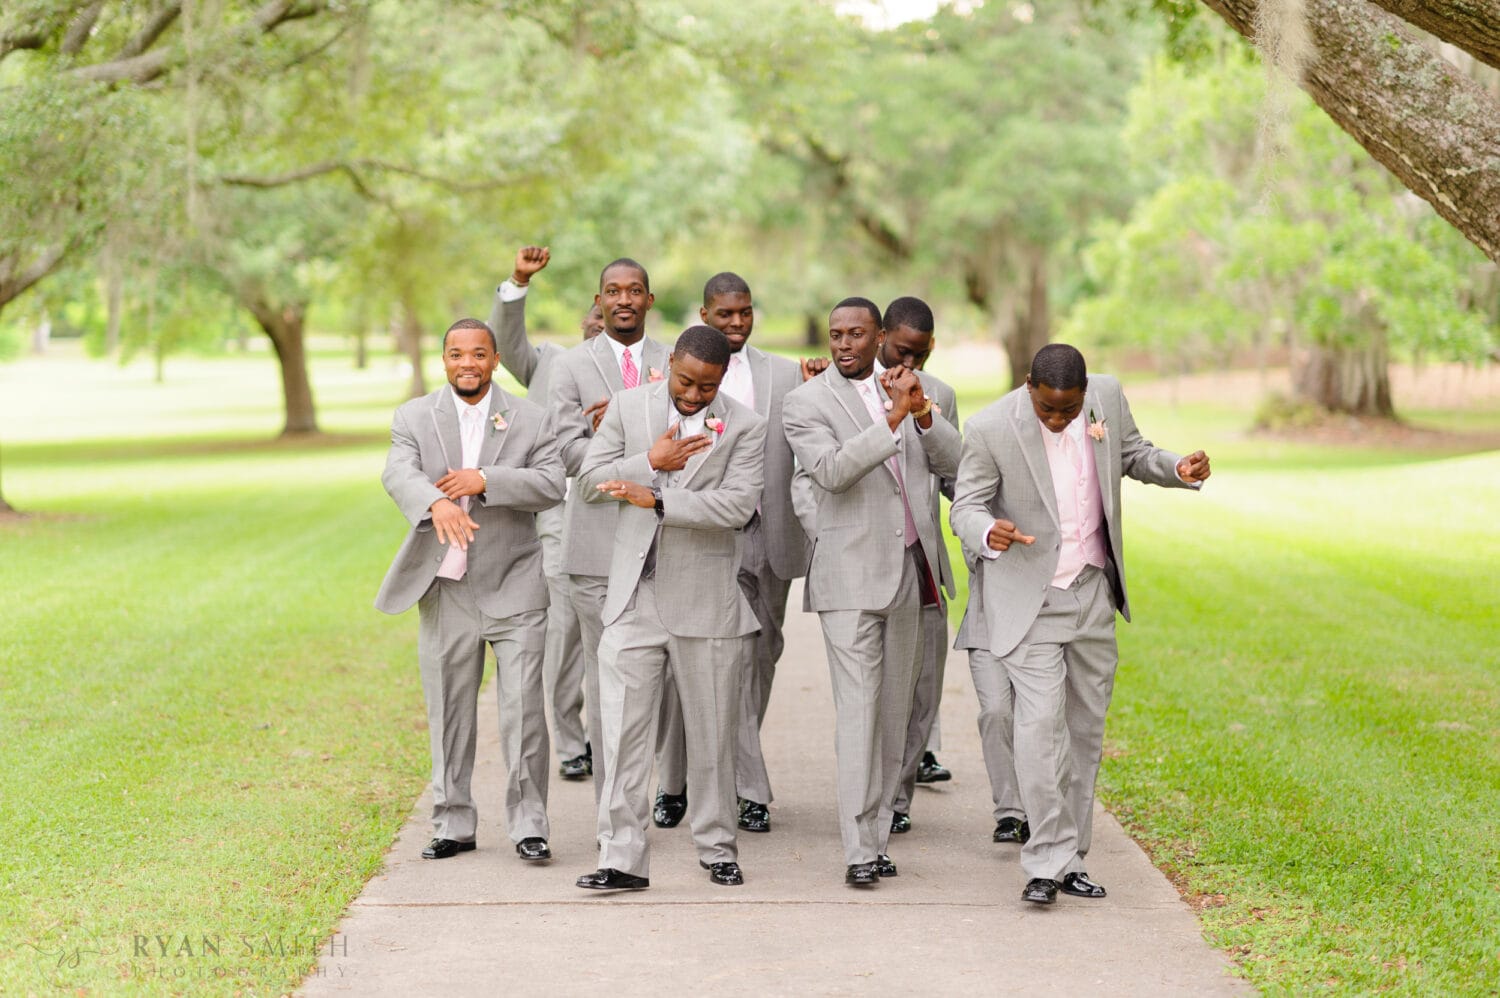 Wedding party pictures after the ceremony - Brookgreen Gardens, Murrells Inlet, SC